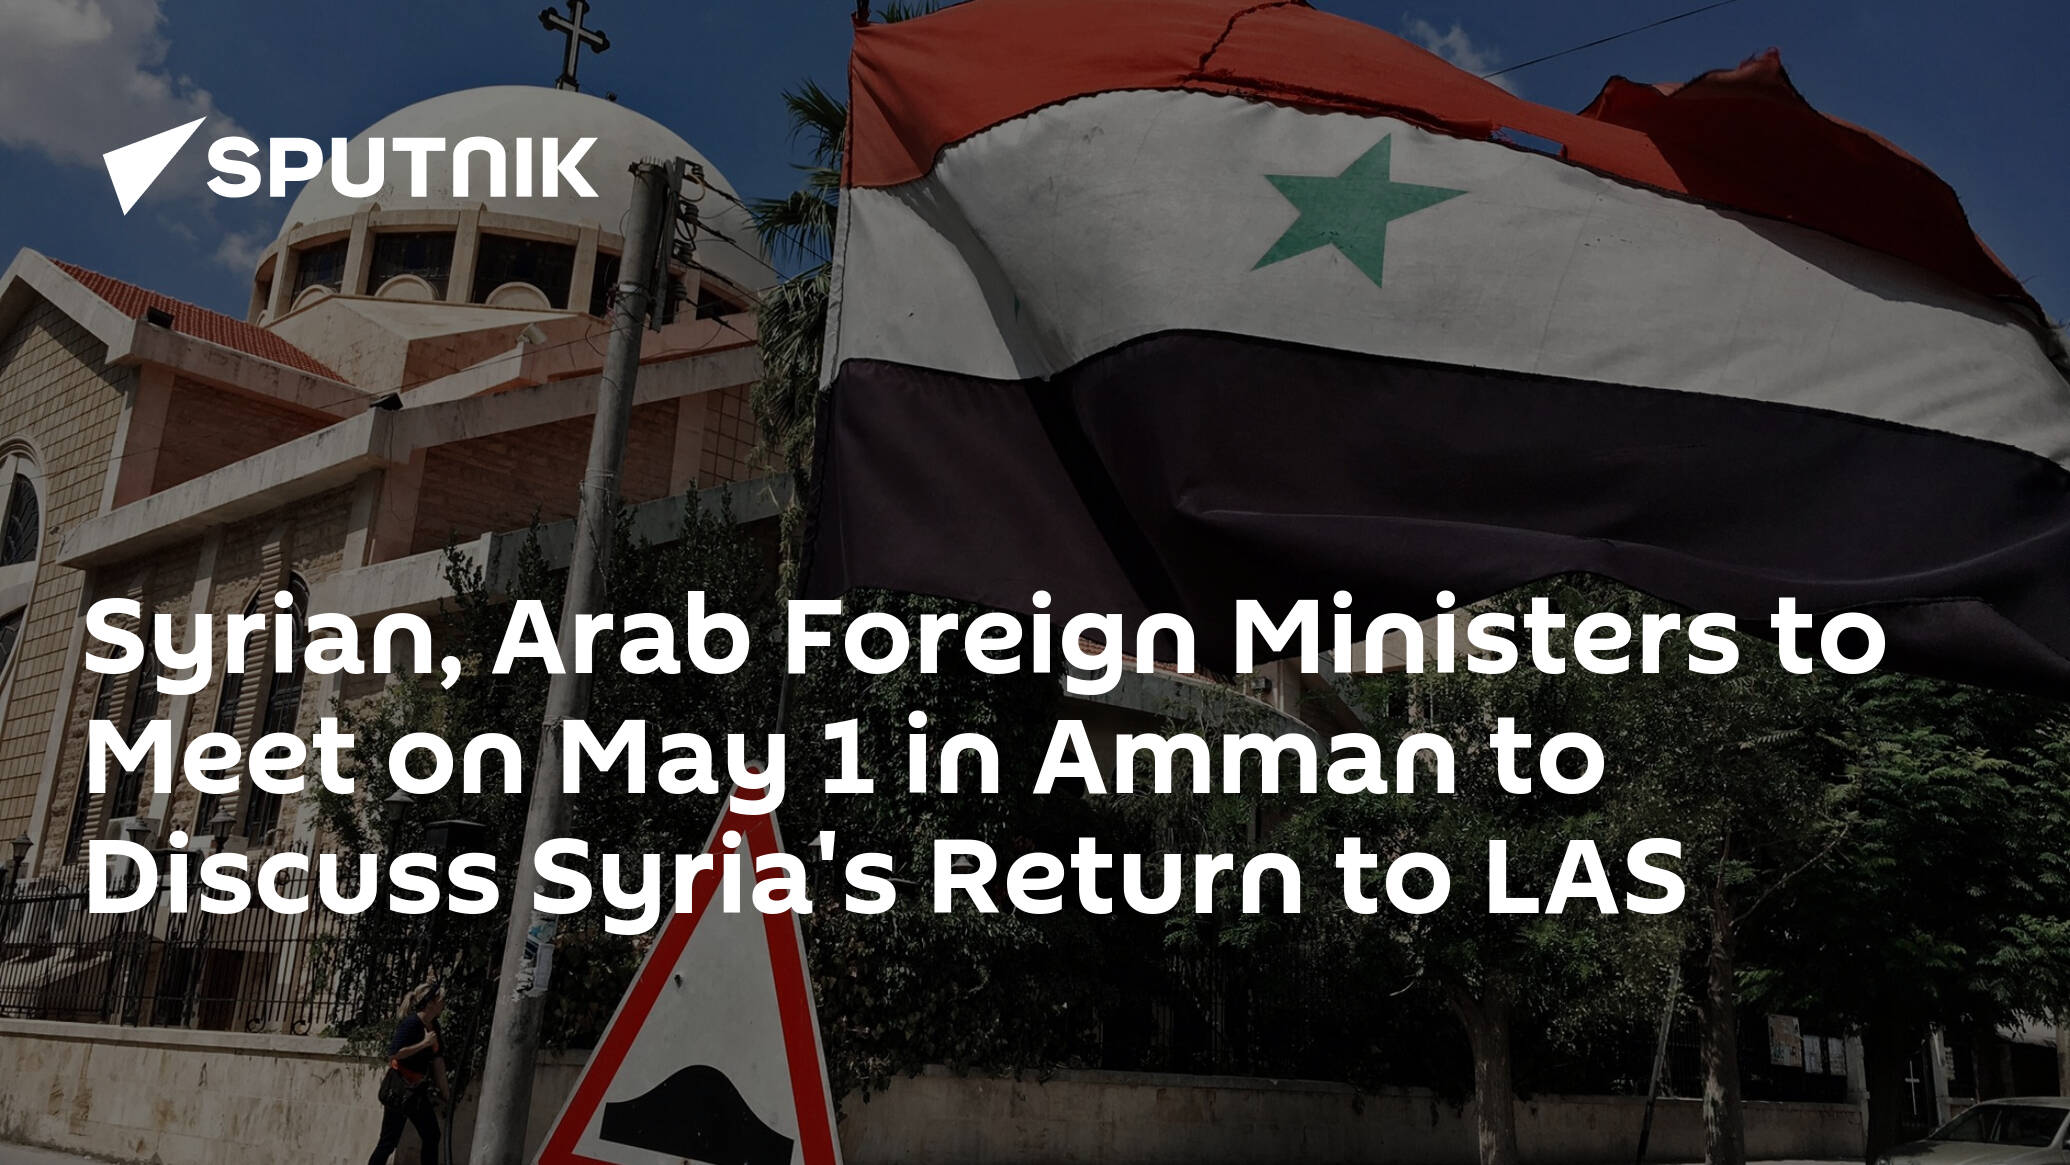 Syrian, Arab Foreign Ministers to Meet on May 1 in Amman to Discuss Syria's Return to LAS